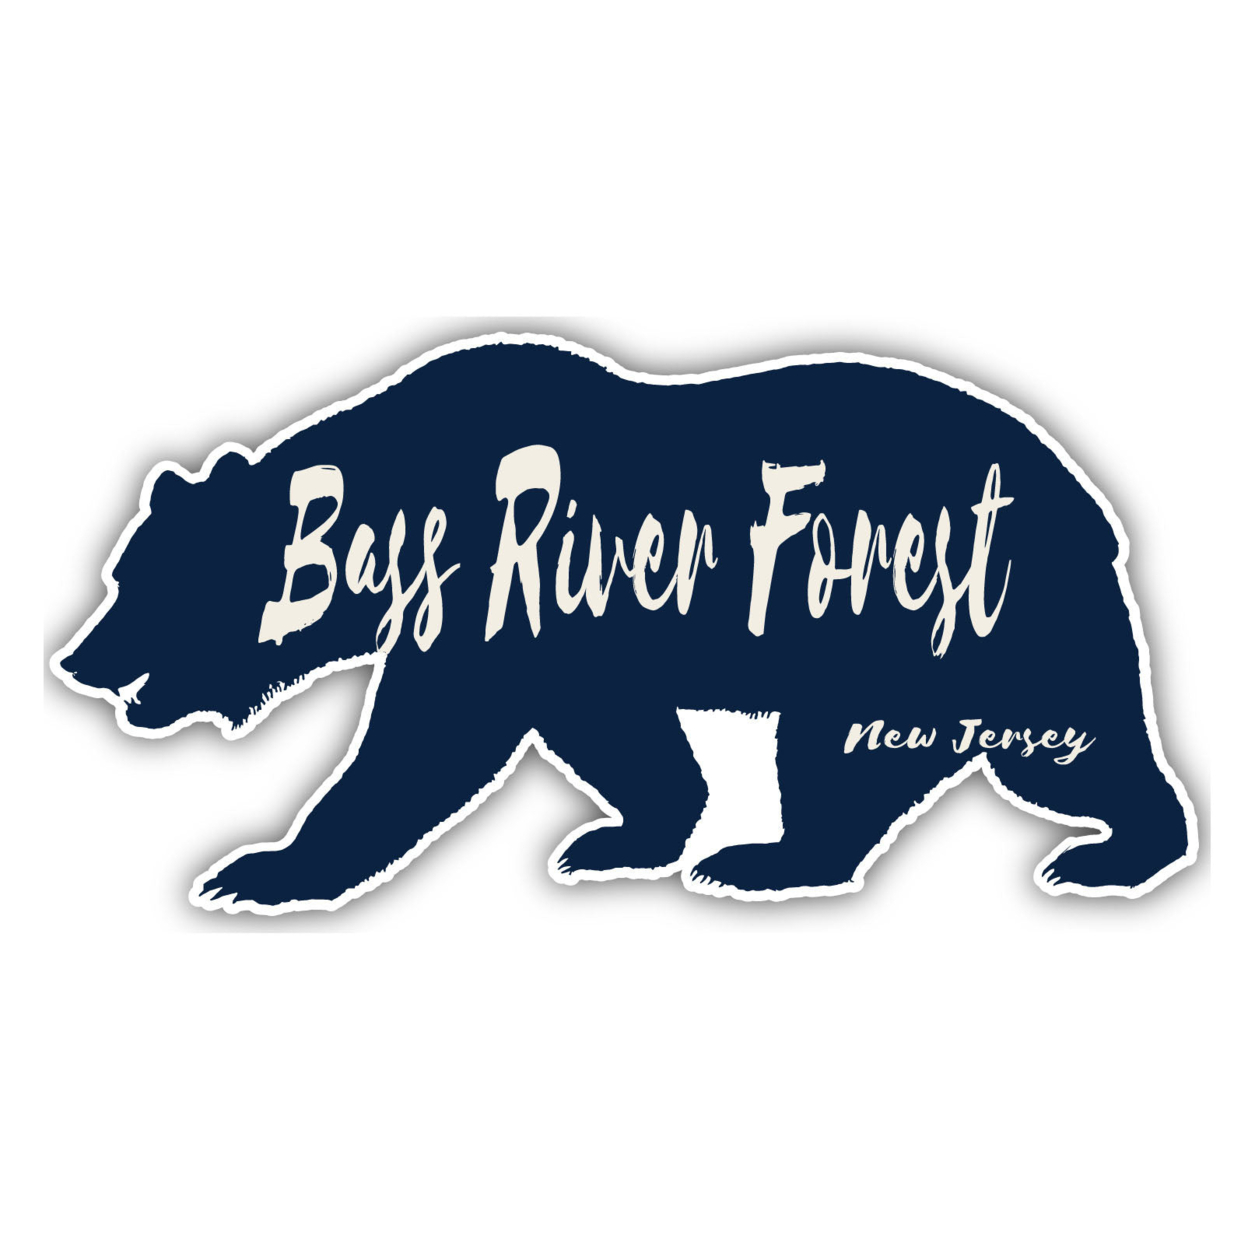 Bass River Forest New Jersey Souvenir Decorative Stickers (Choose Theme And Size) - 4-Pack, 2-Inch, Bear